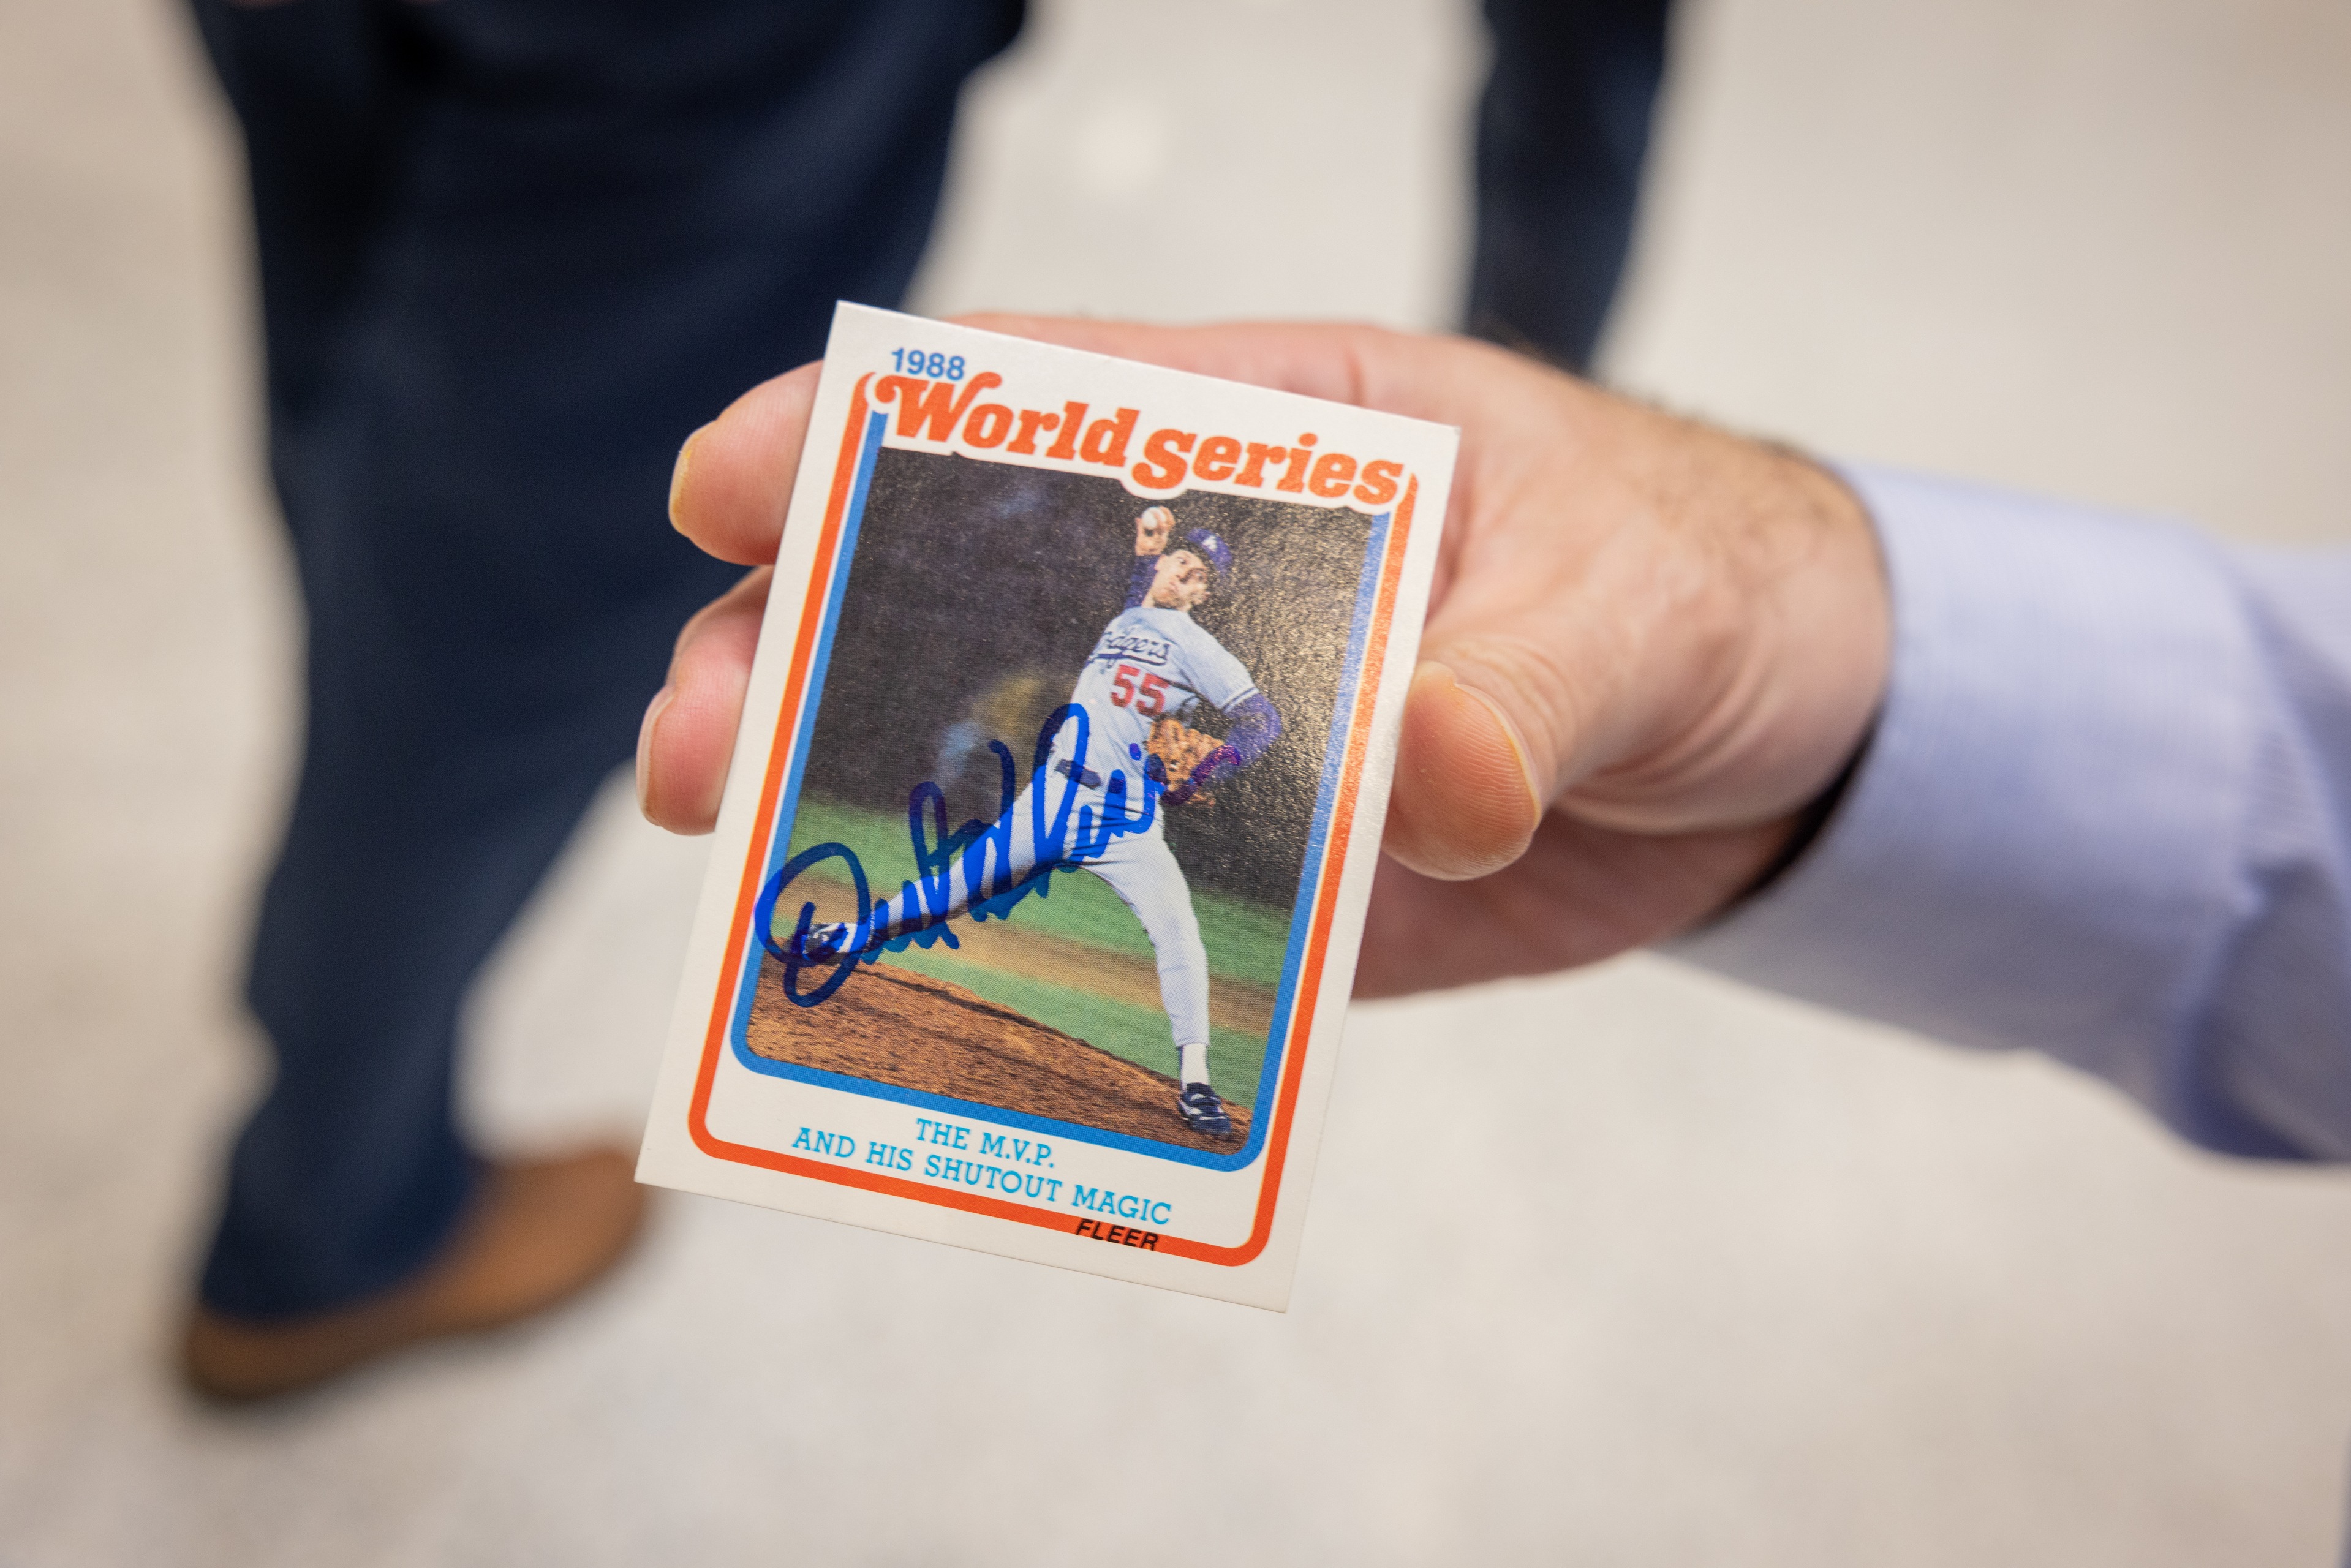 A signed baseball card shows Orel Hershiser during the 1988 World Series.